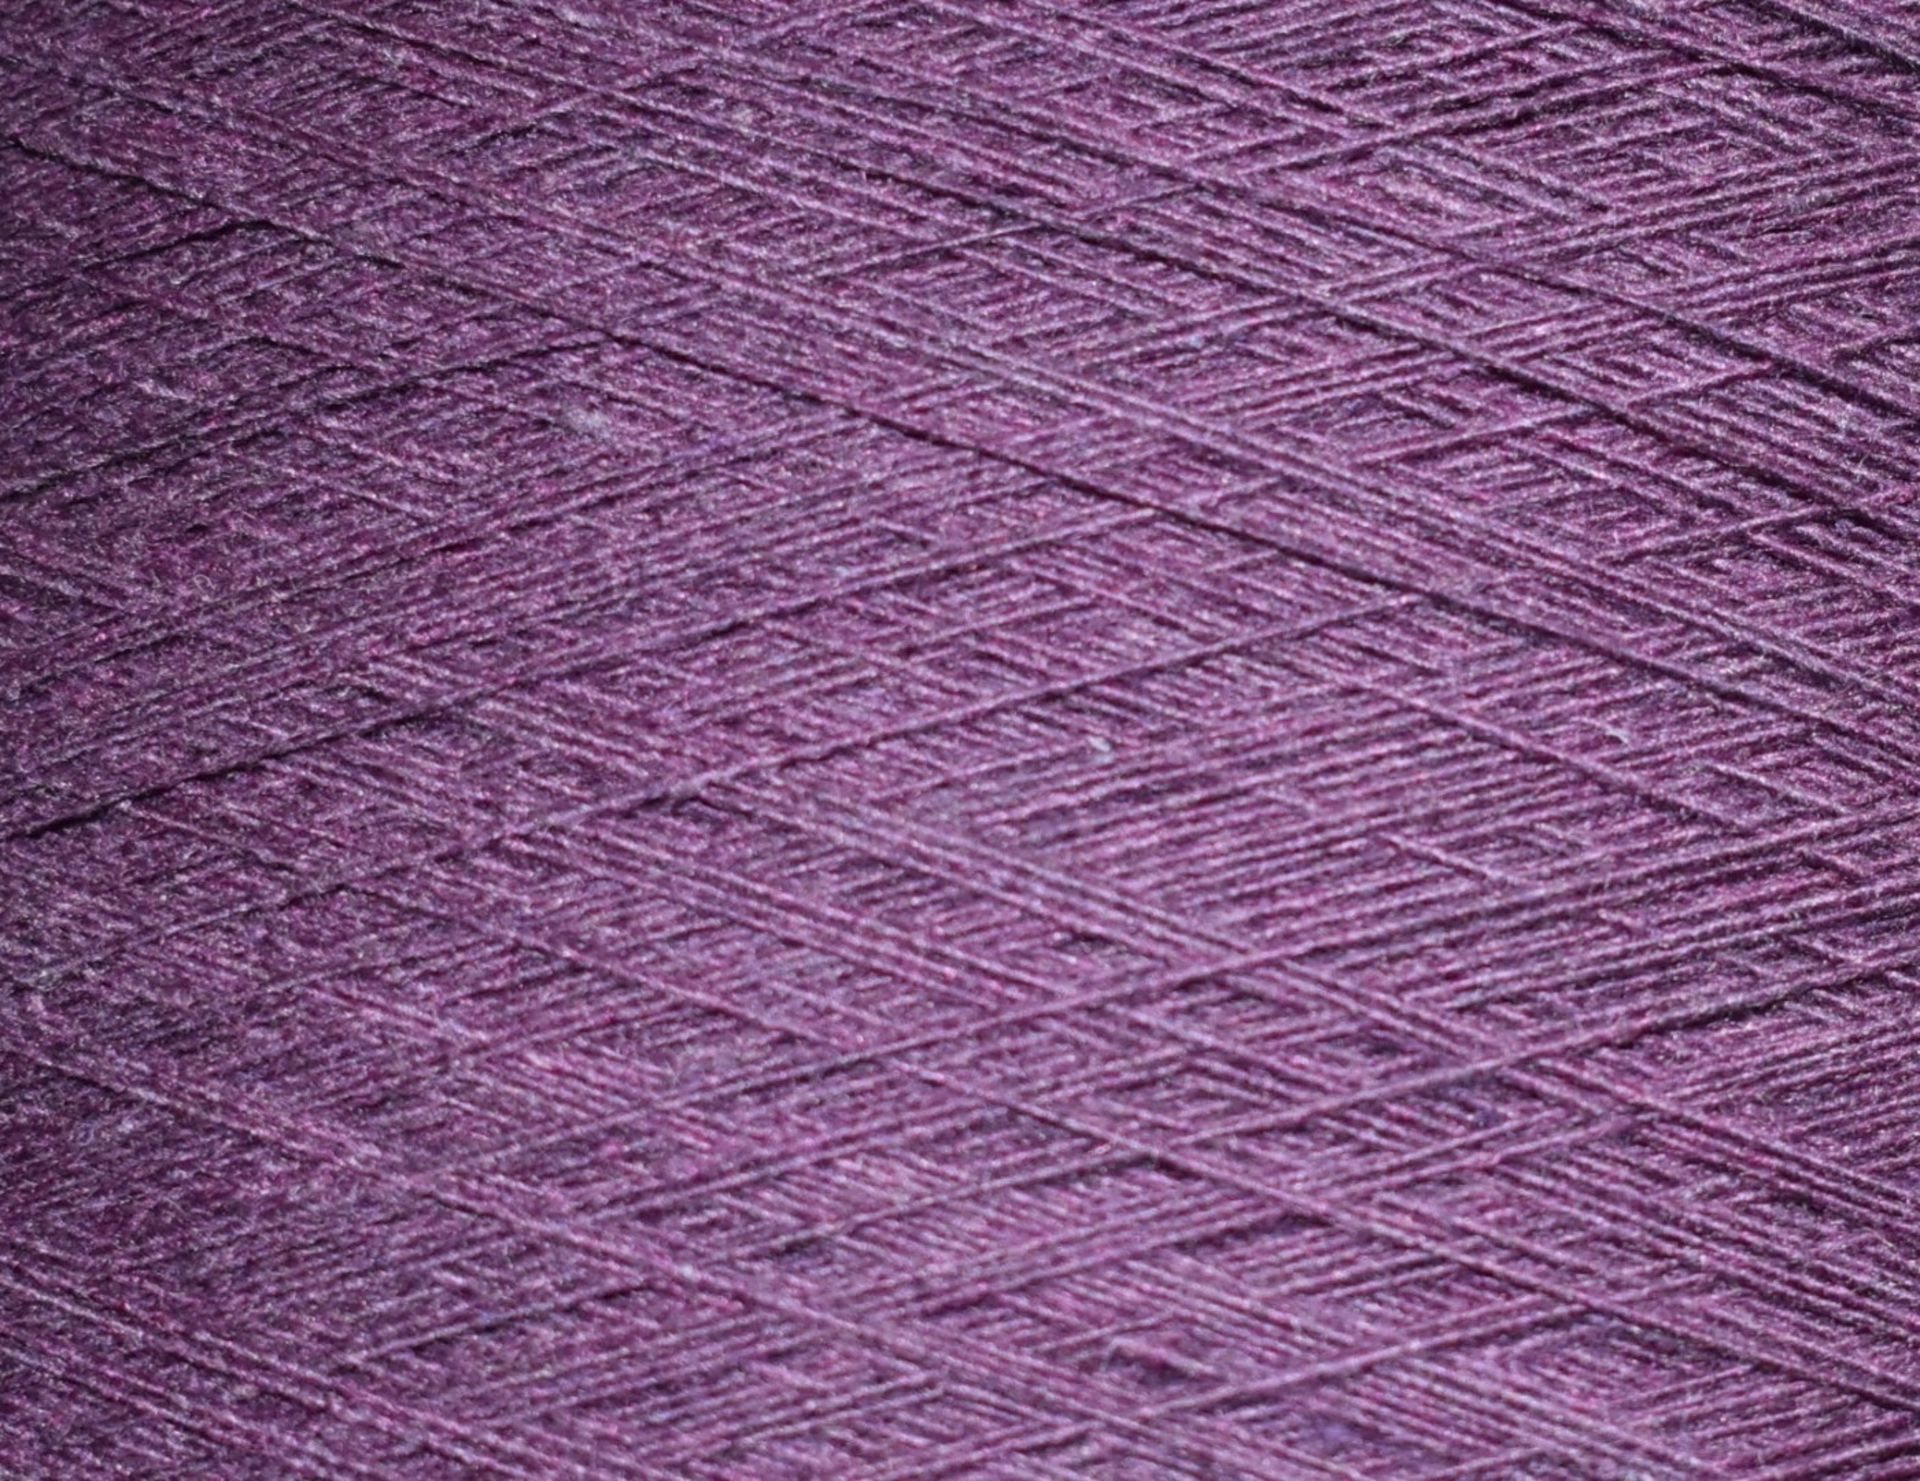 6 x Cones of 1/13 MicroCotton Knitting Yarn - Colour: Purple - Approx Weight: 2,300g - New Stock - Image 6 of 9